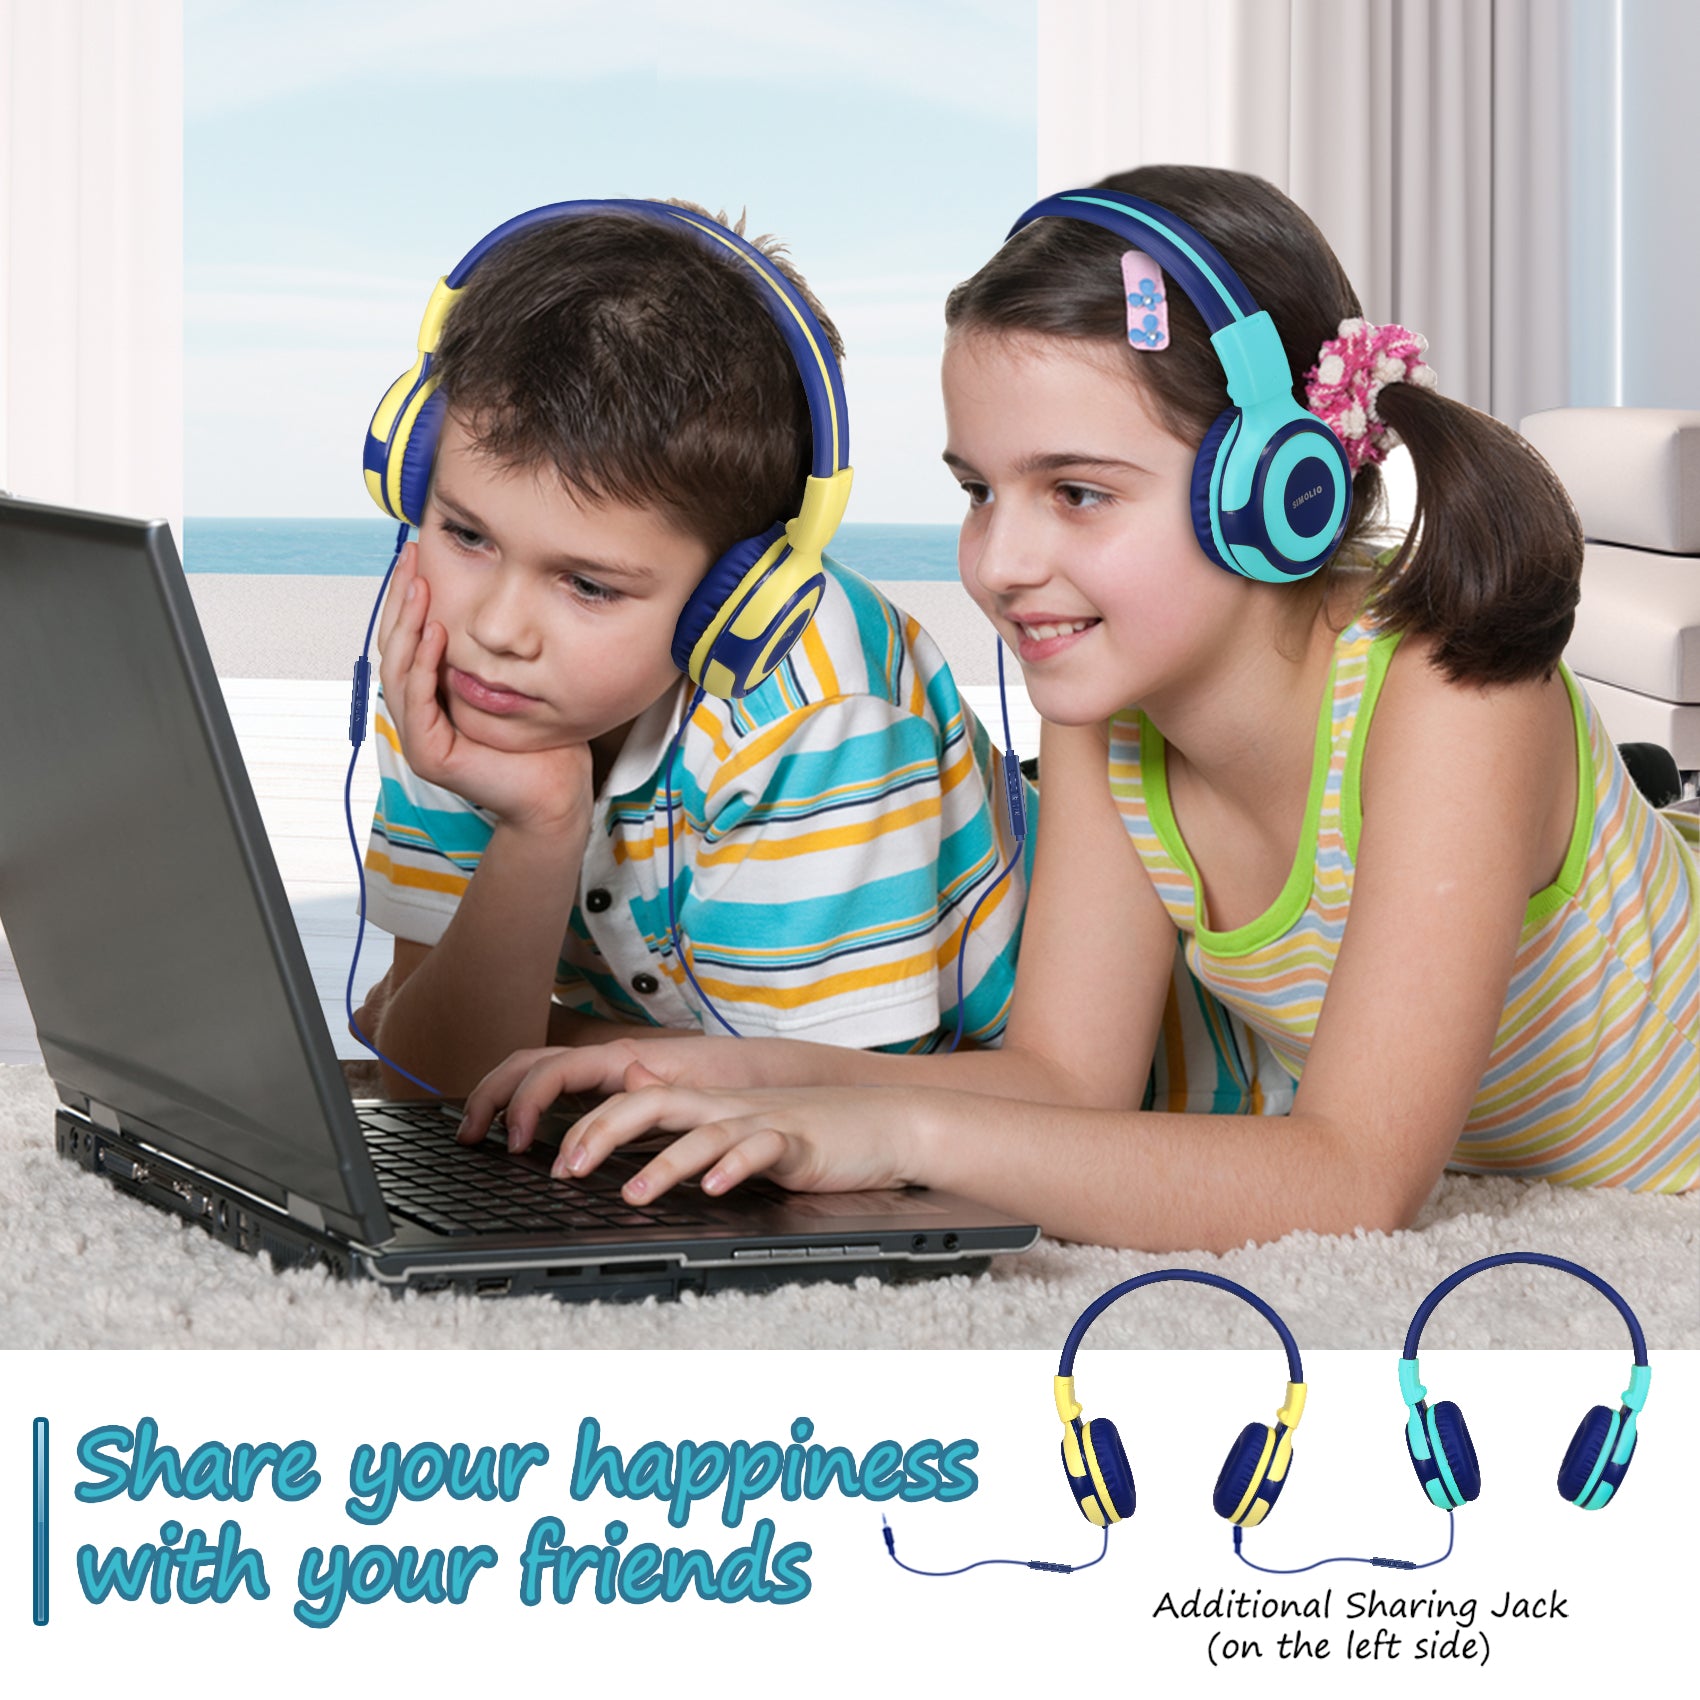 Children can use Simolio wired headphones to share audio with their friends and family